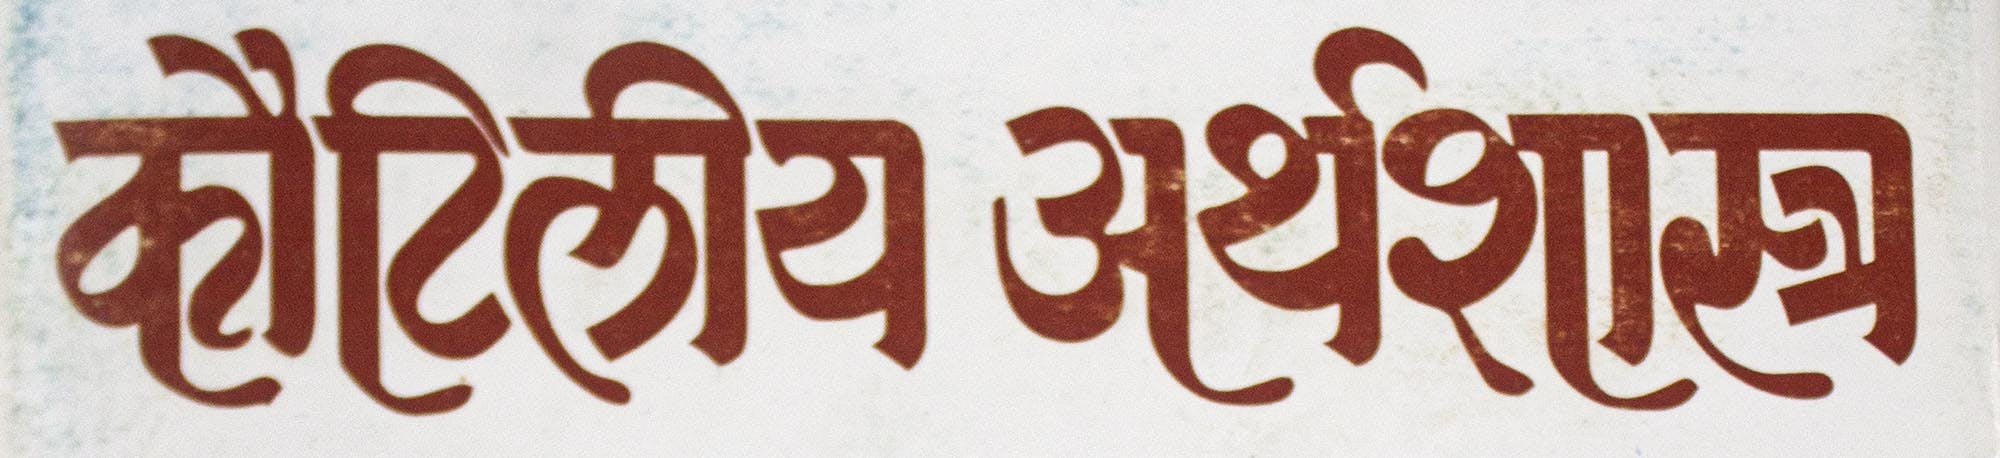 Manuscript-style lettering used in the title